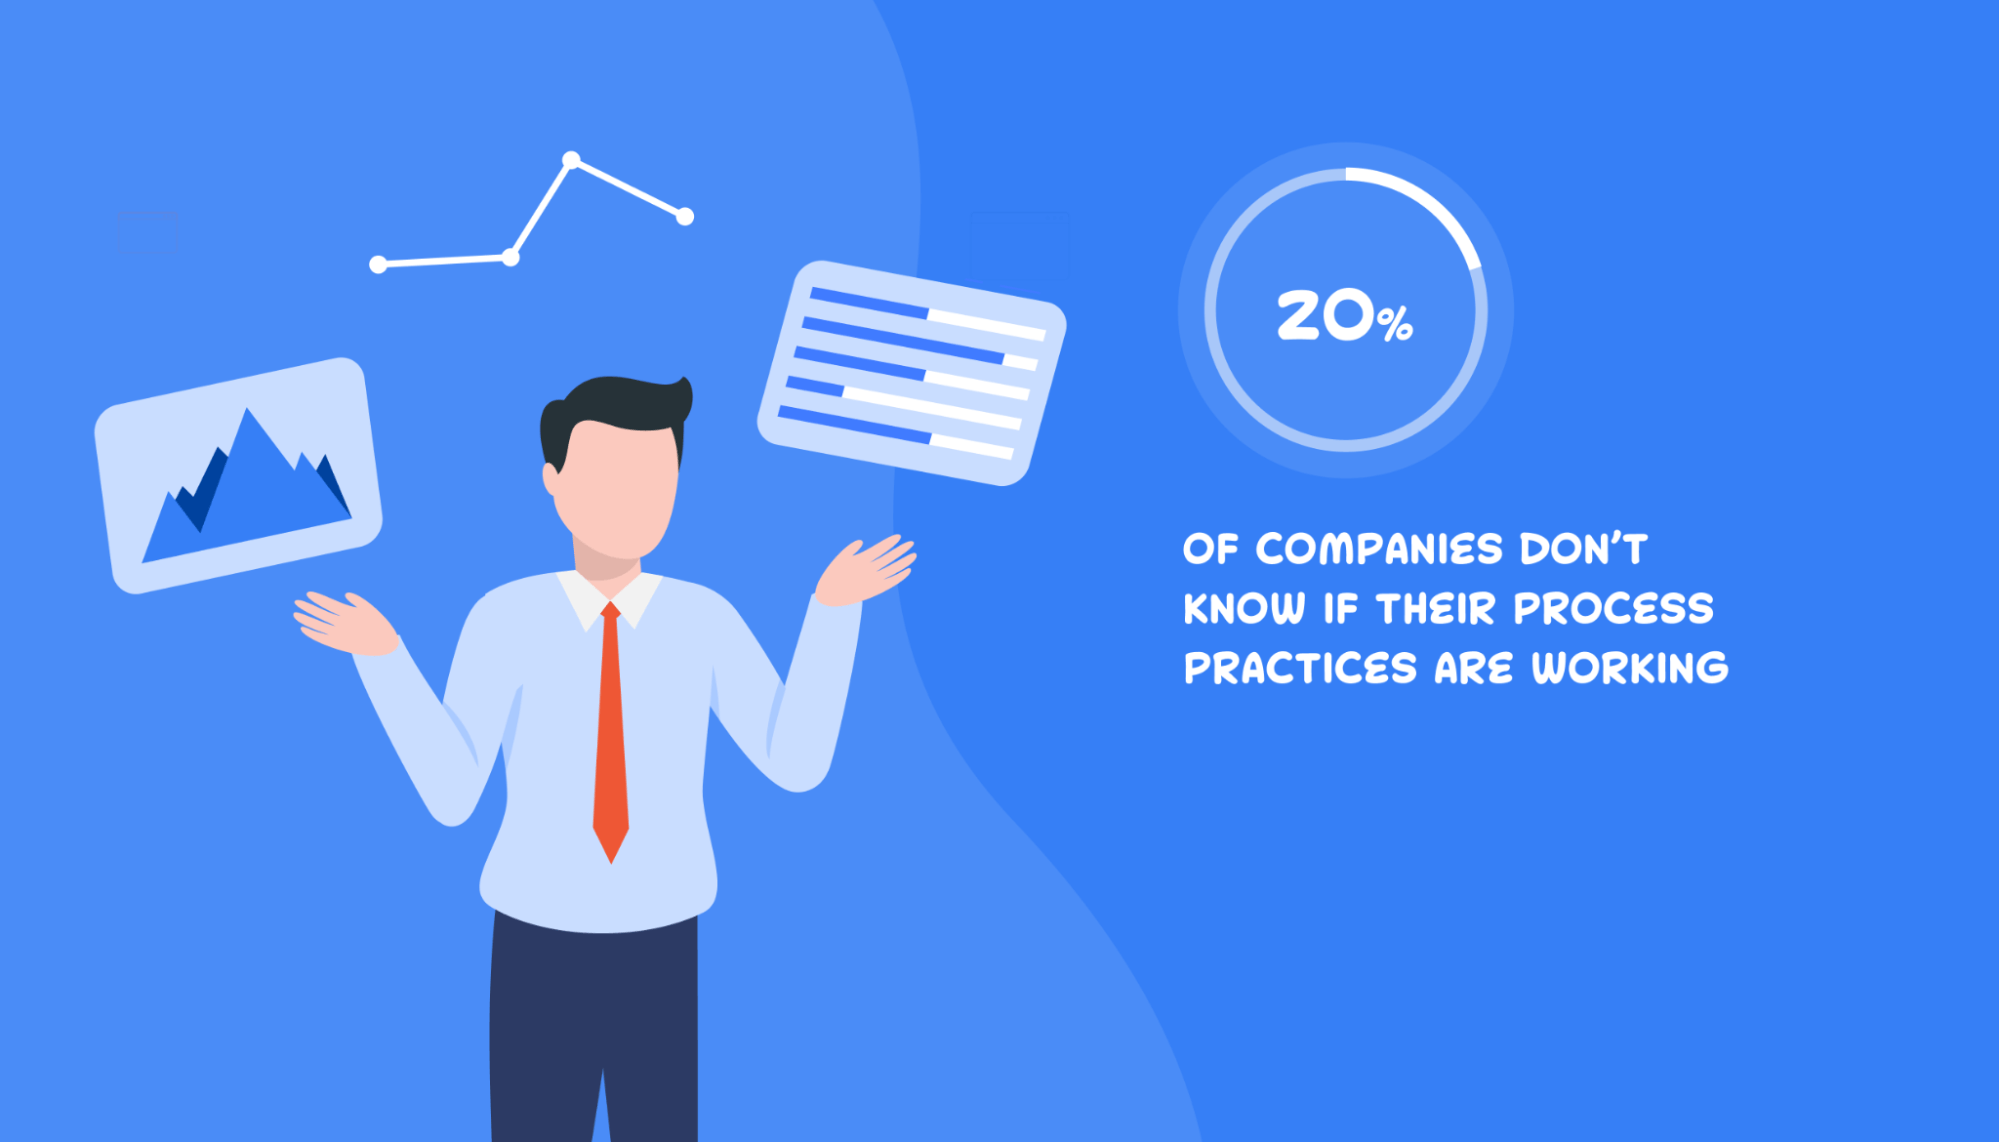 20% of companies don’t know if their process practices are working